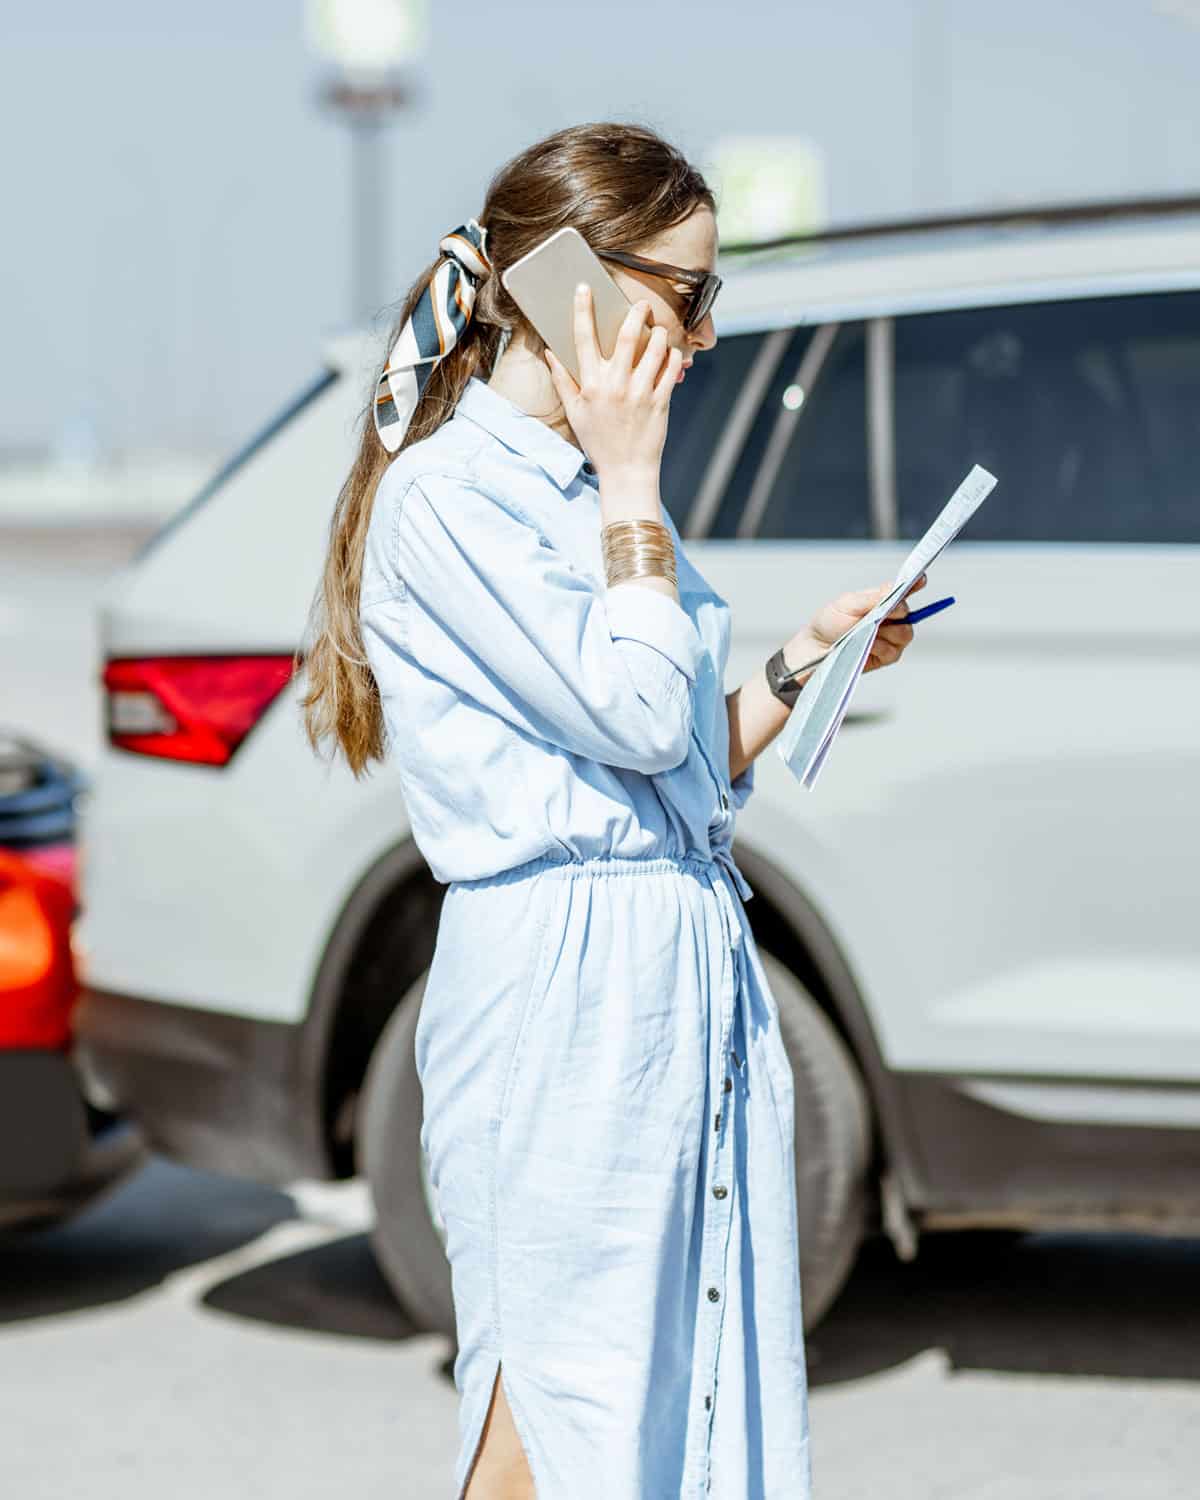 woman in blue dress talks on phone with personal injury attorney in parking lot